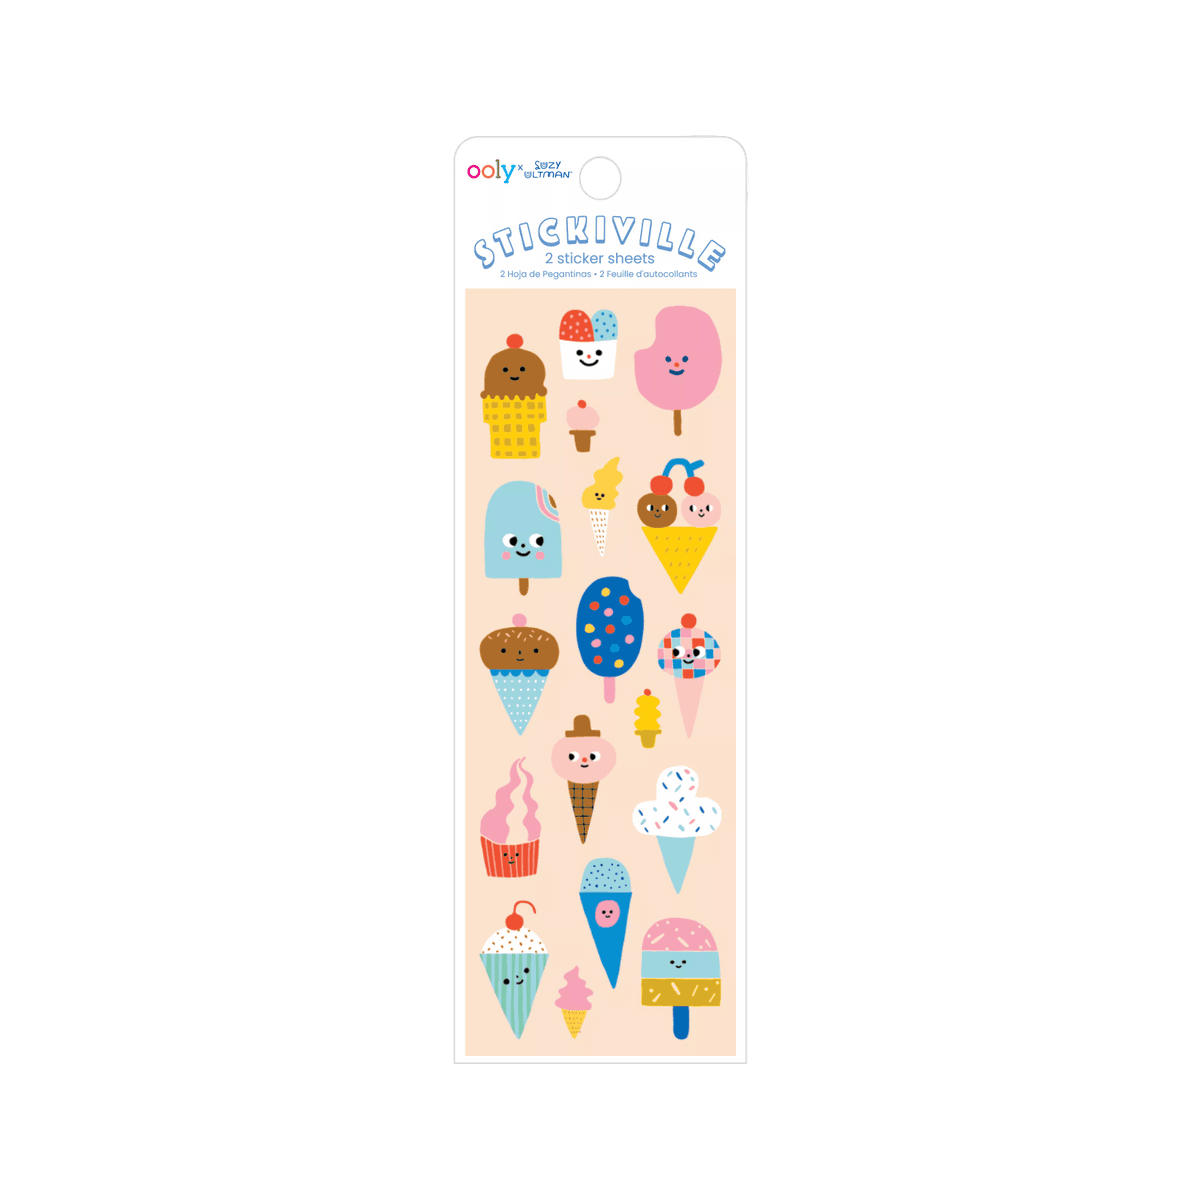 Stickiville Ice Cream sticker sheets in packaging